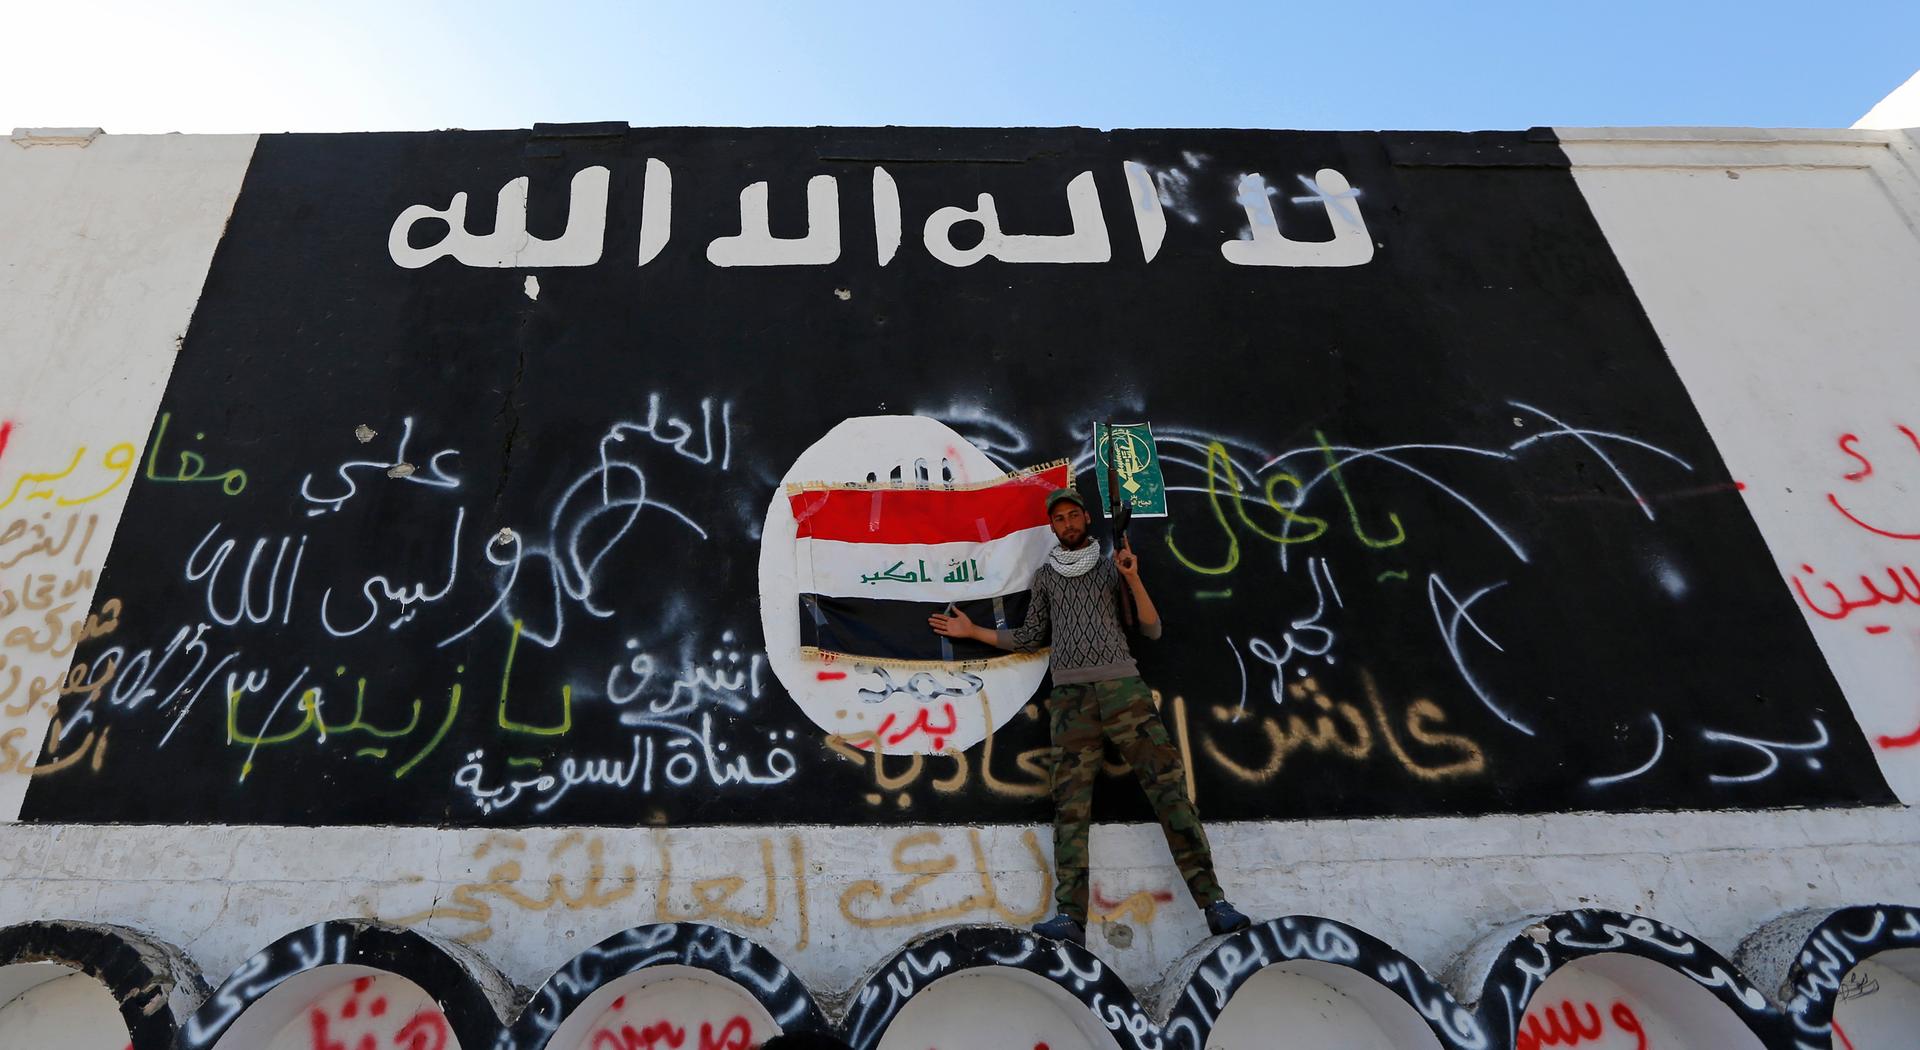 ISIS flag in Iraq